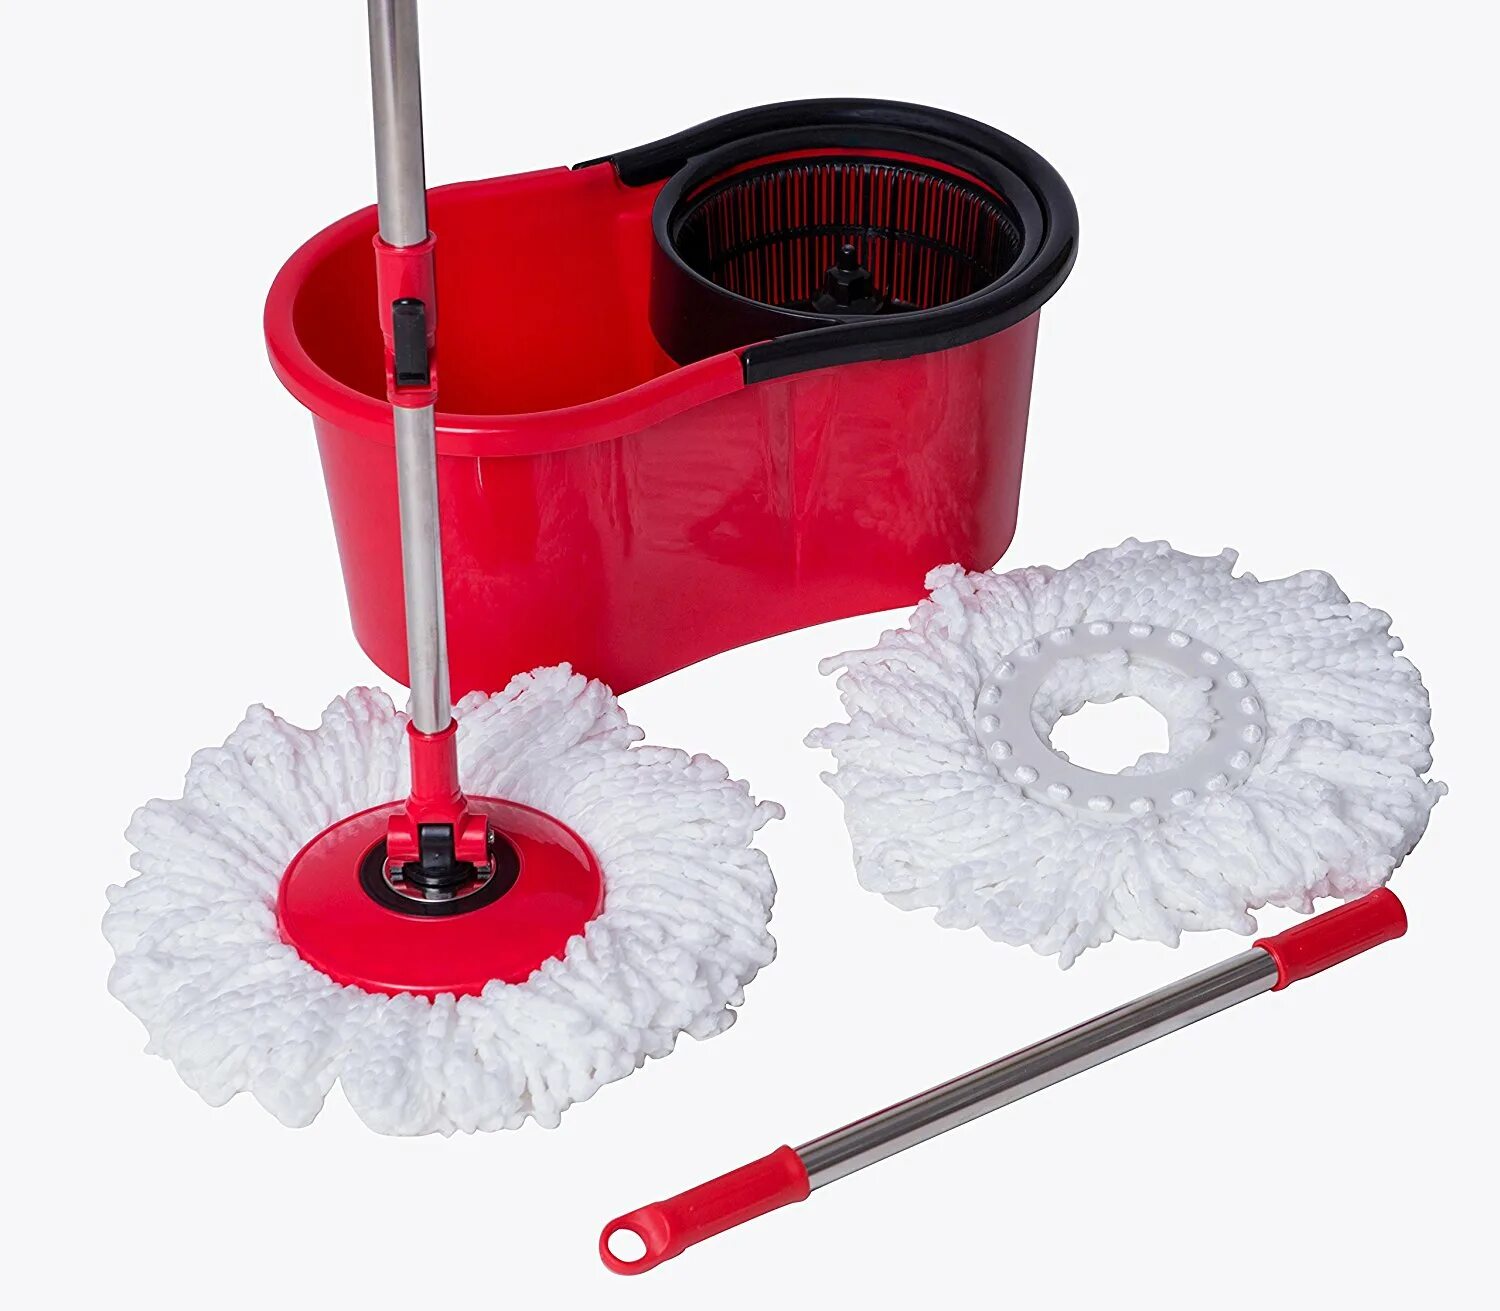 Spin mop. Швабра Spin Mop. Spin Mop Telescopik. Bucket with Centrifuge and Mop.